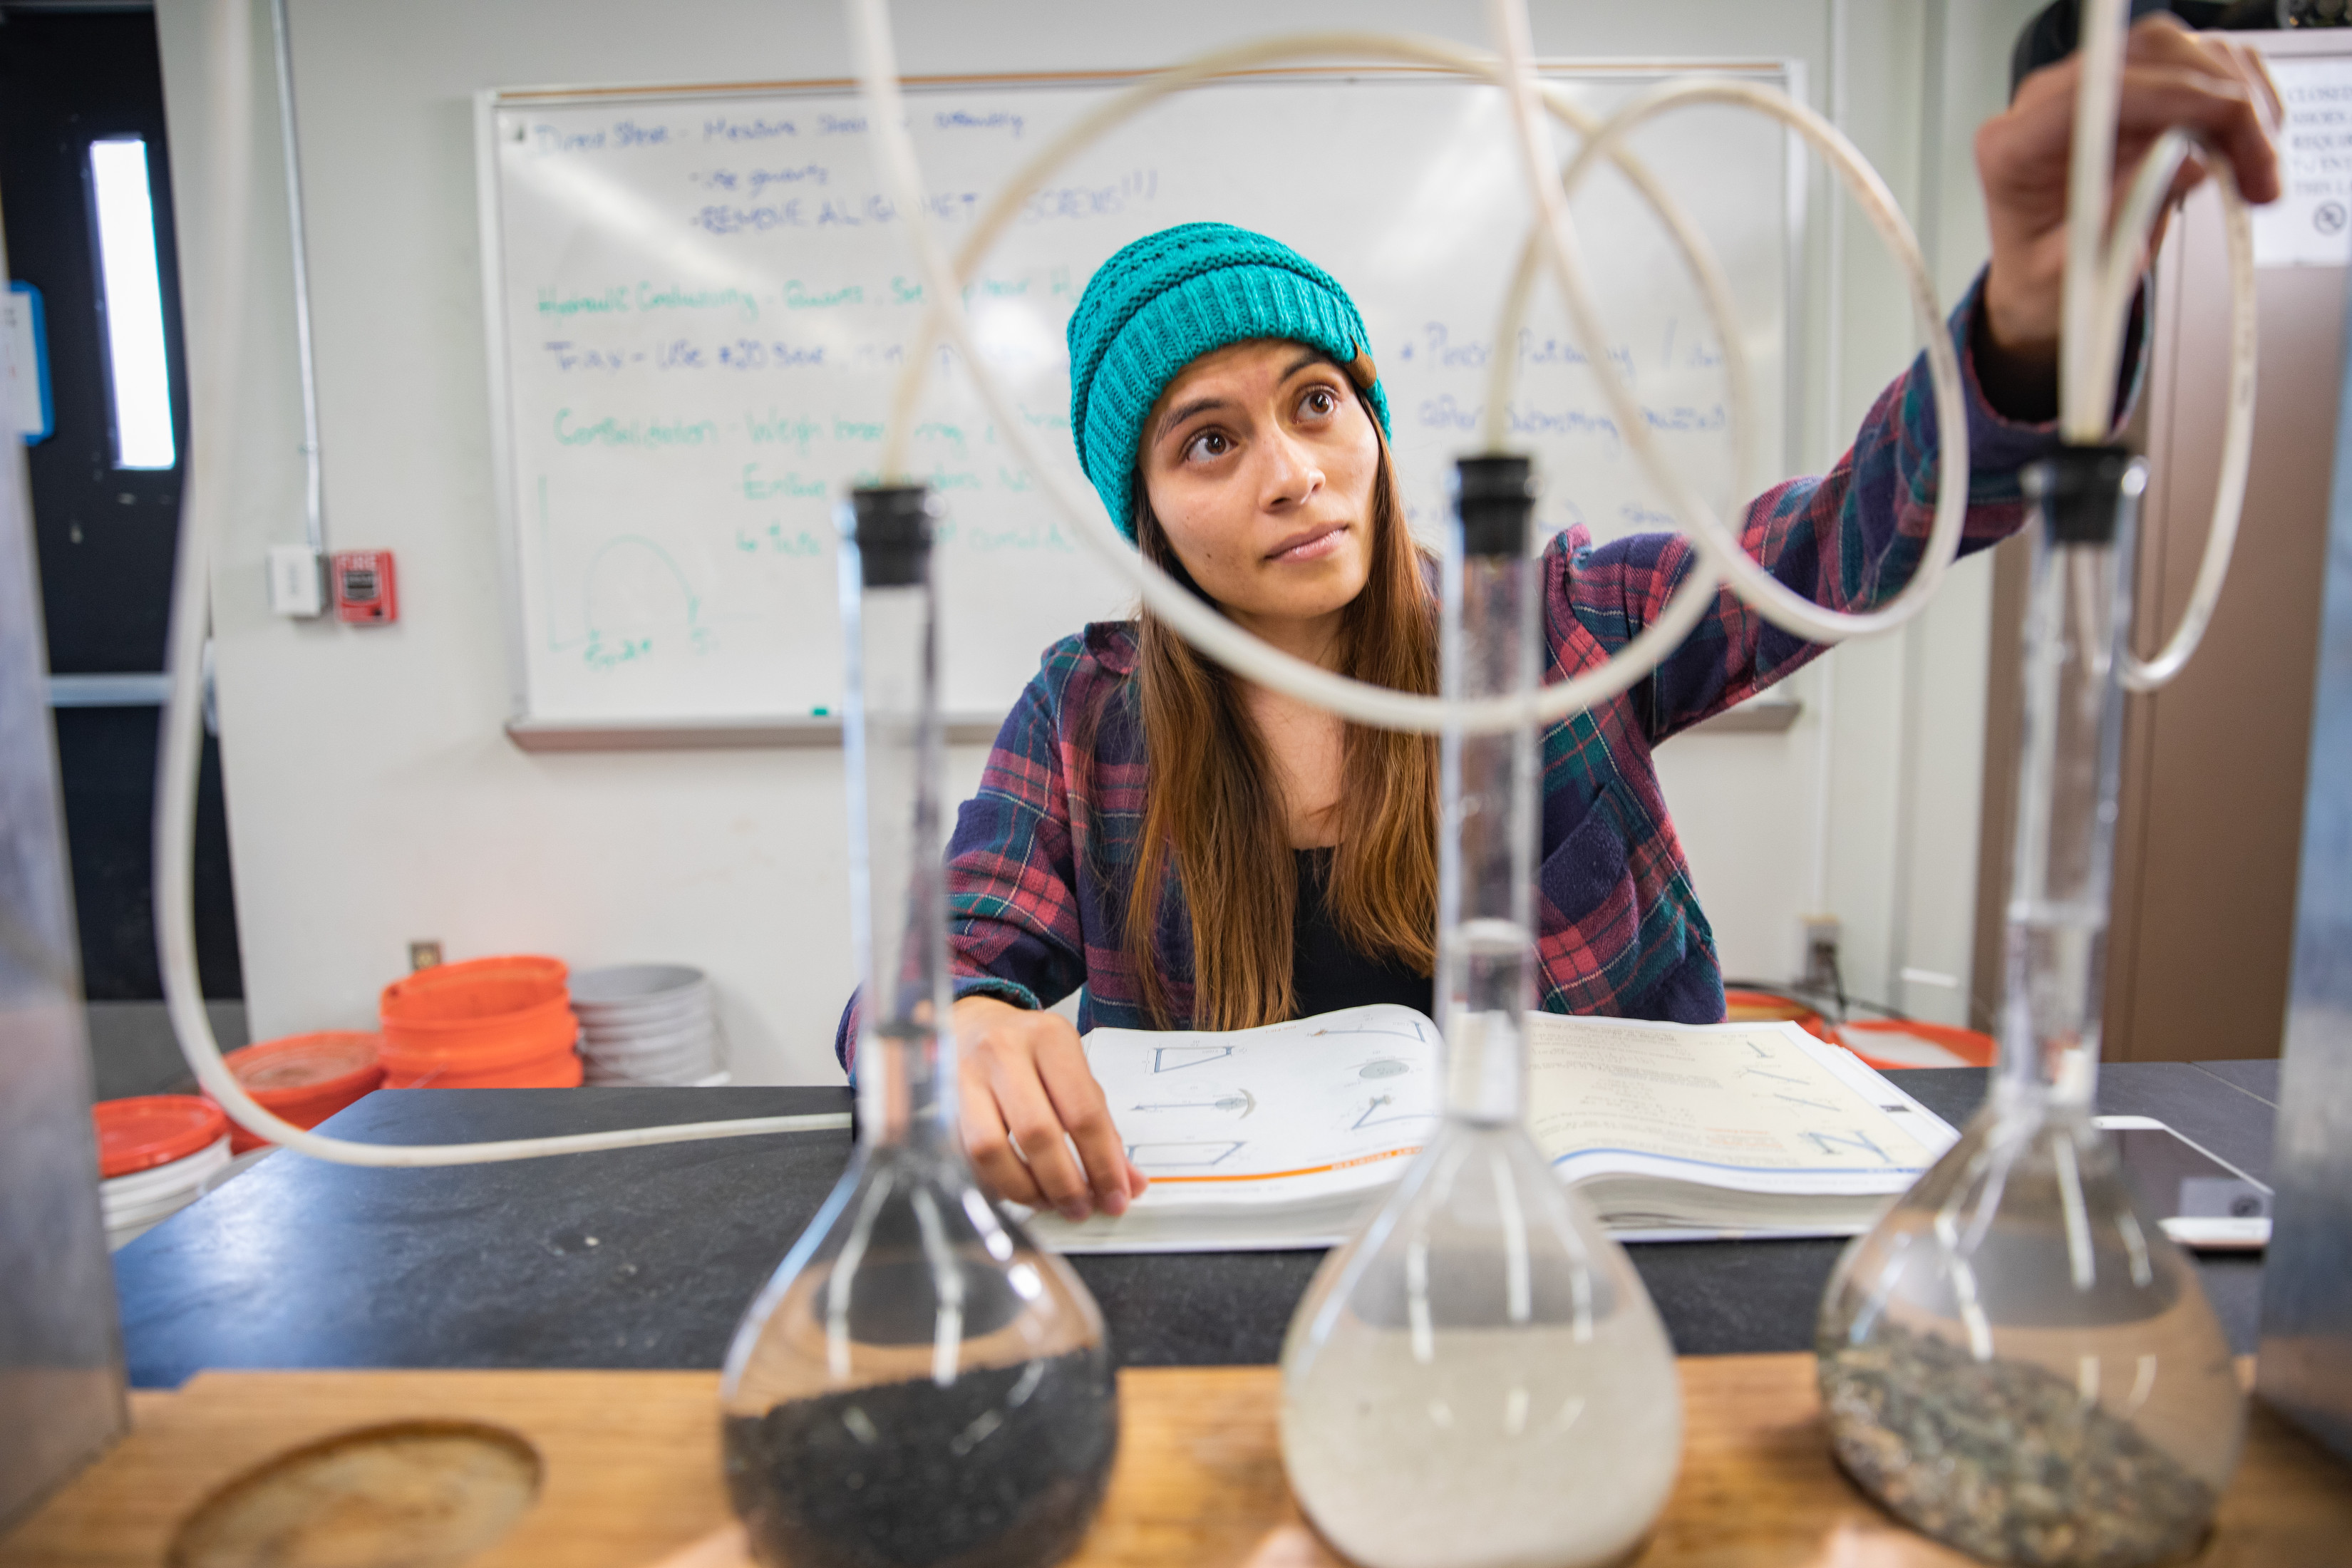 A student feeds a tube into three volumetric flasks in a science experiment.